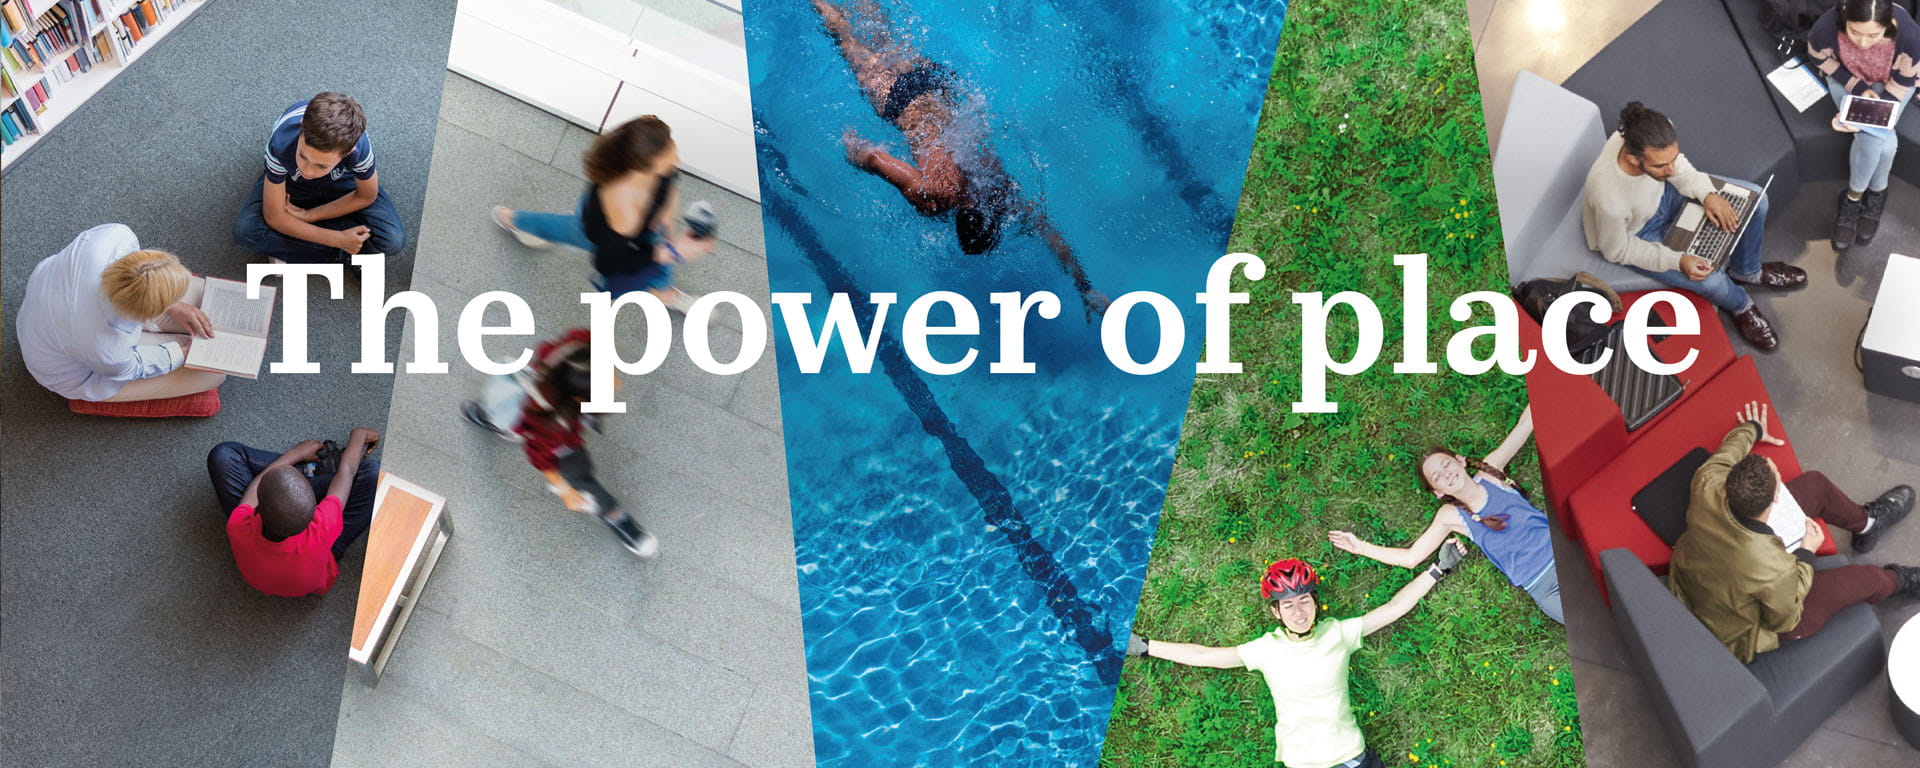 Power of Place | ISG